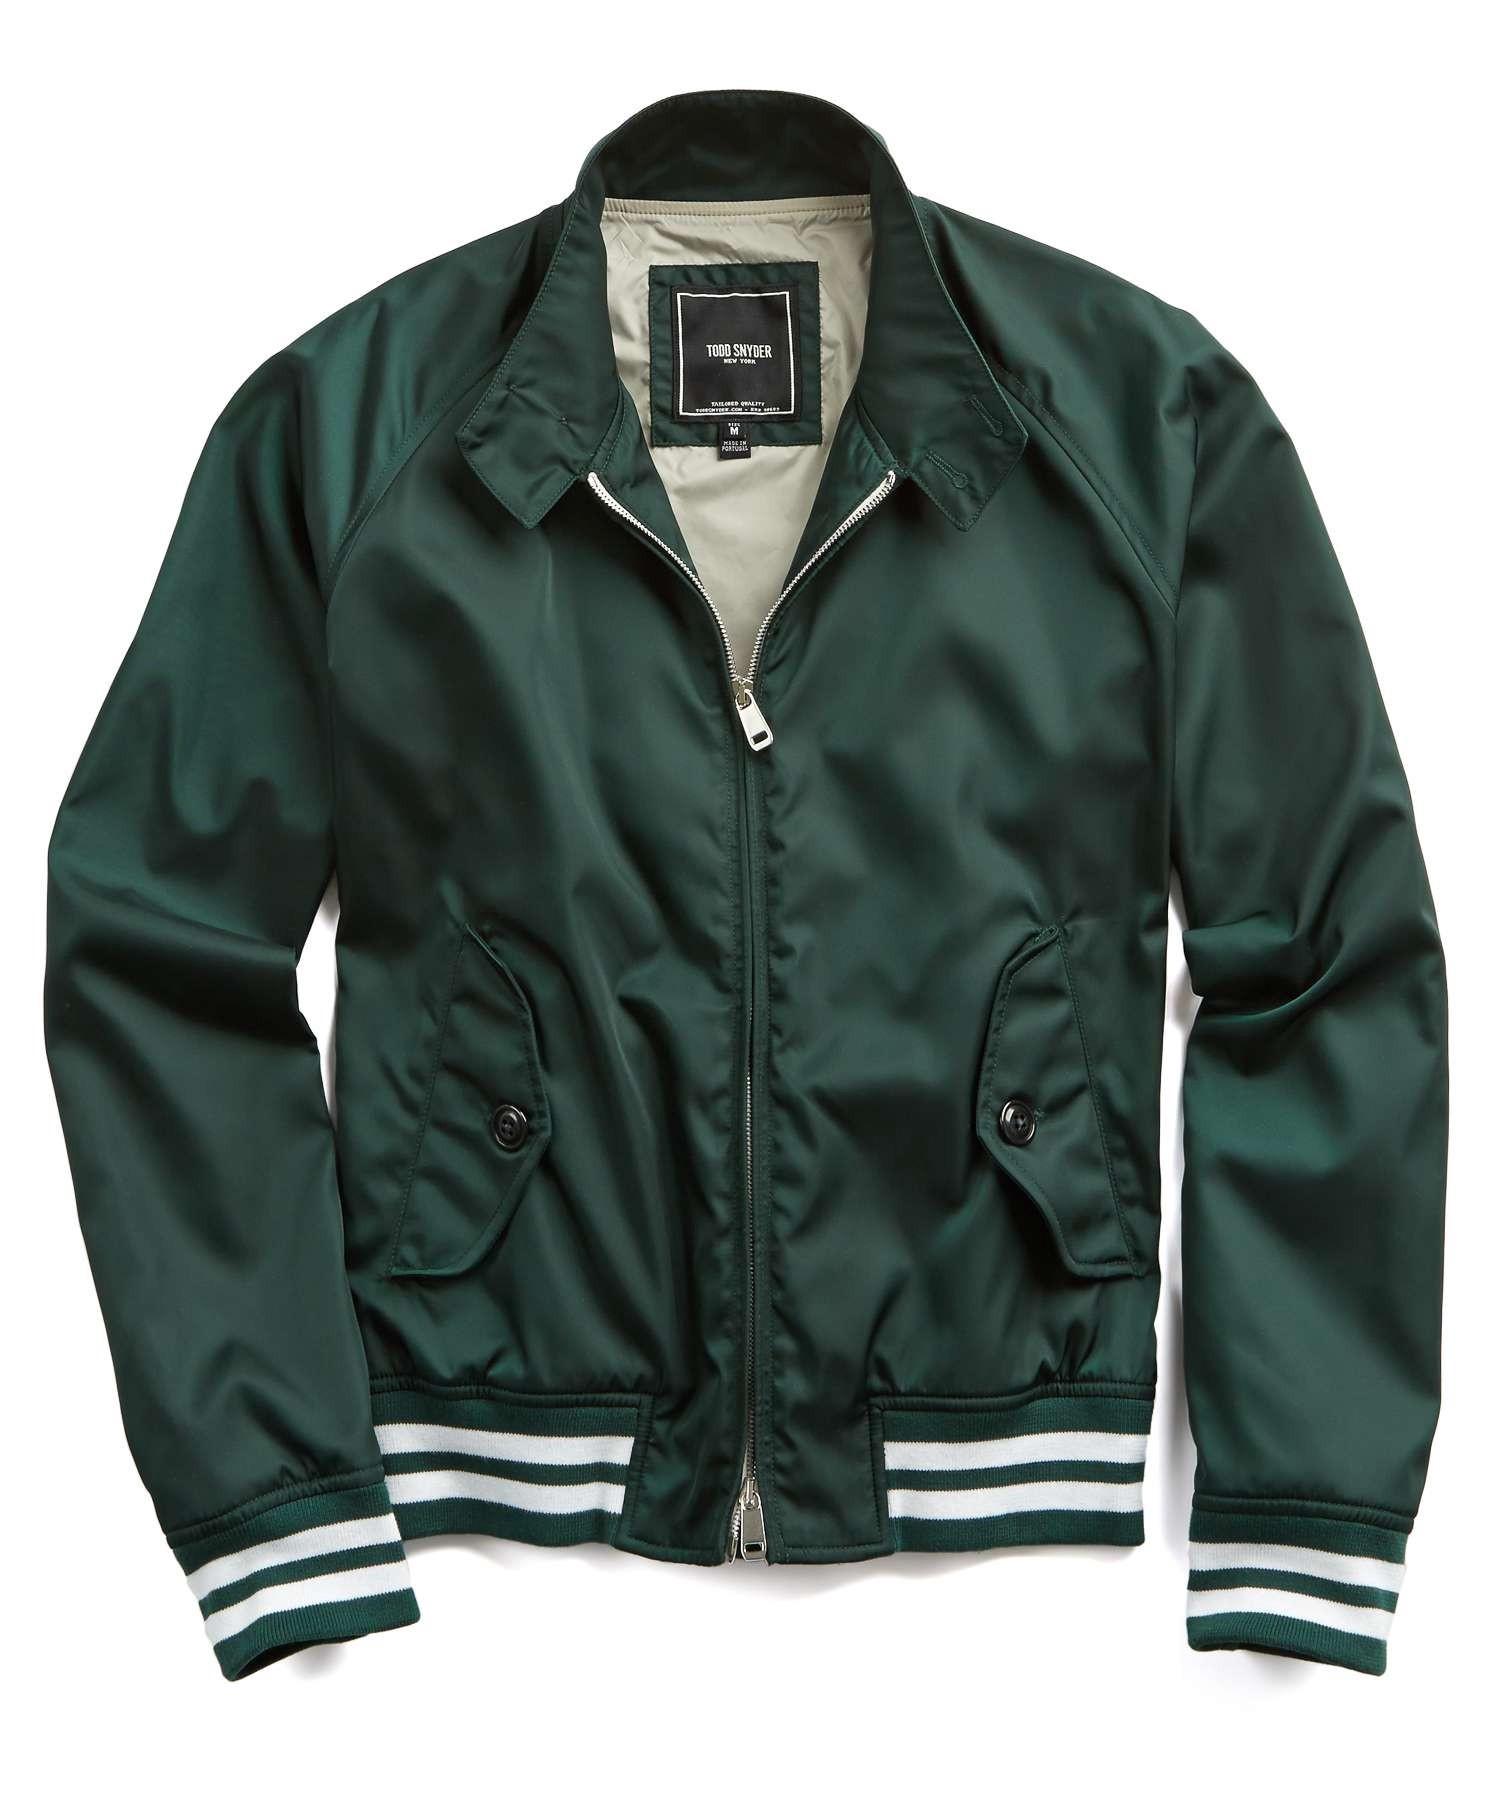 Todd Snyder Nylon Barracuda Jacket With Racing Stripes In Hunter Green ...